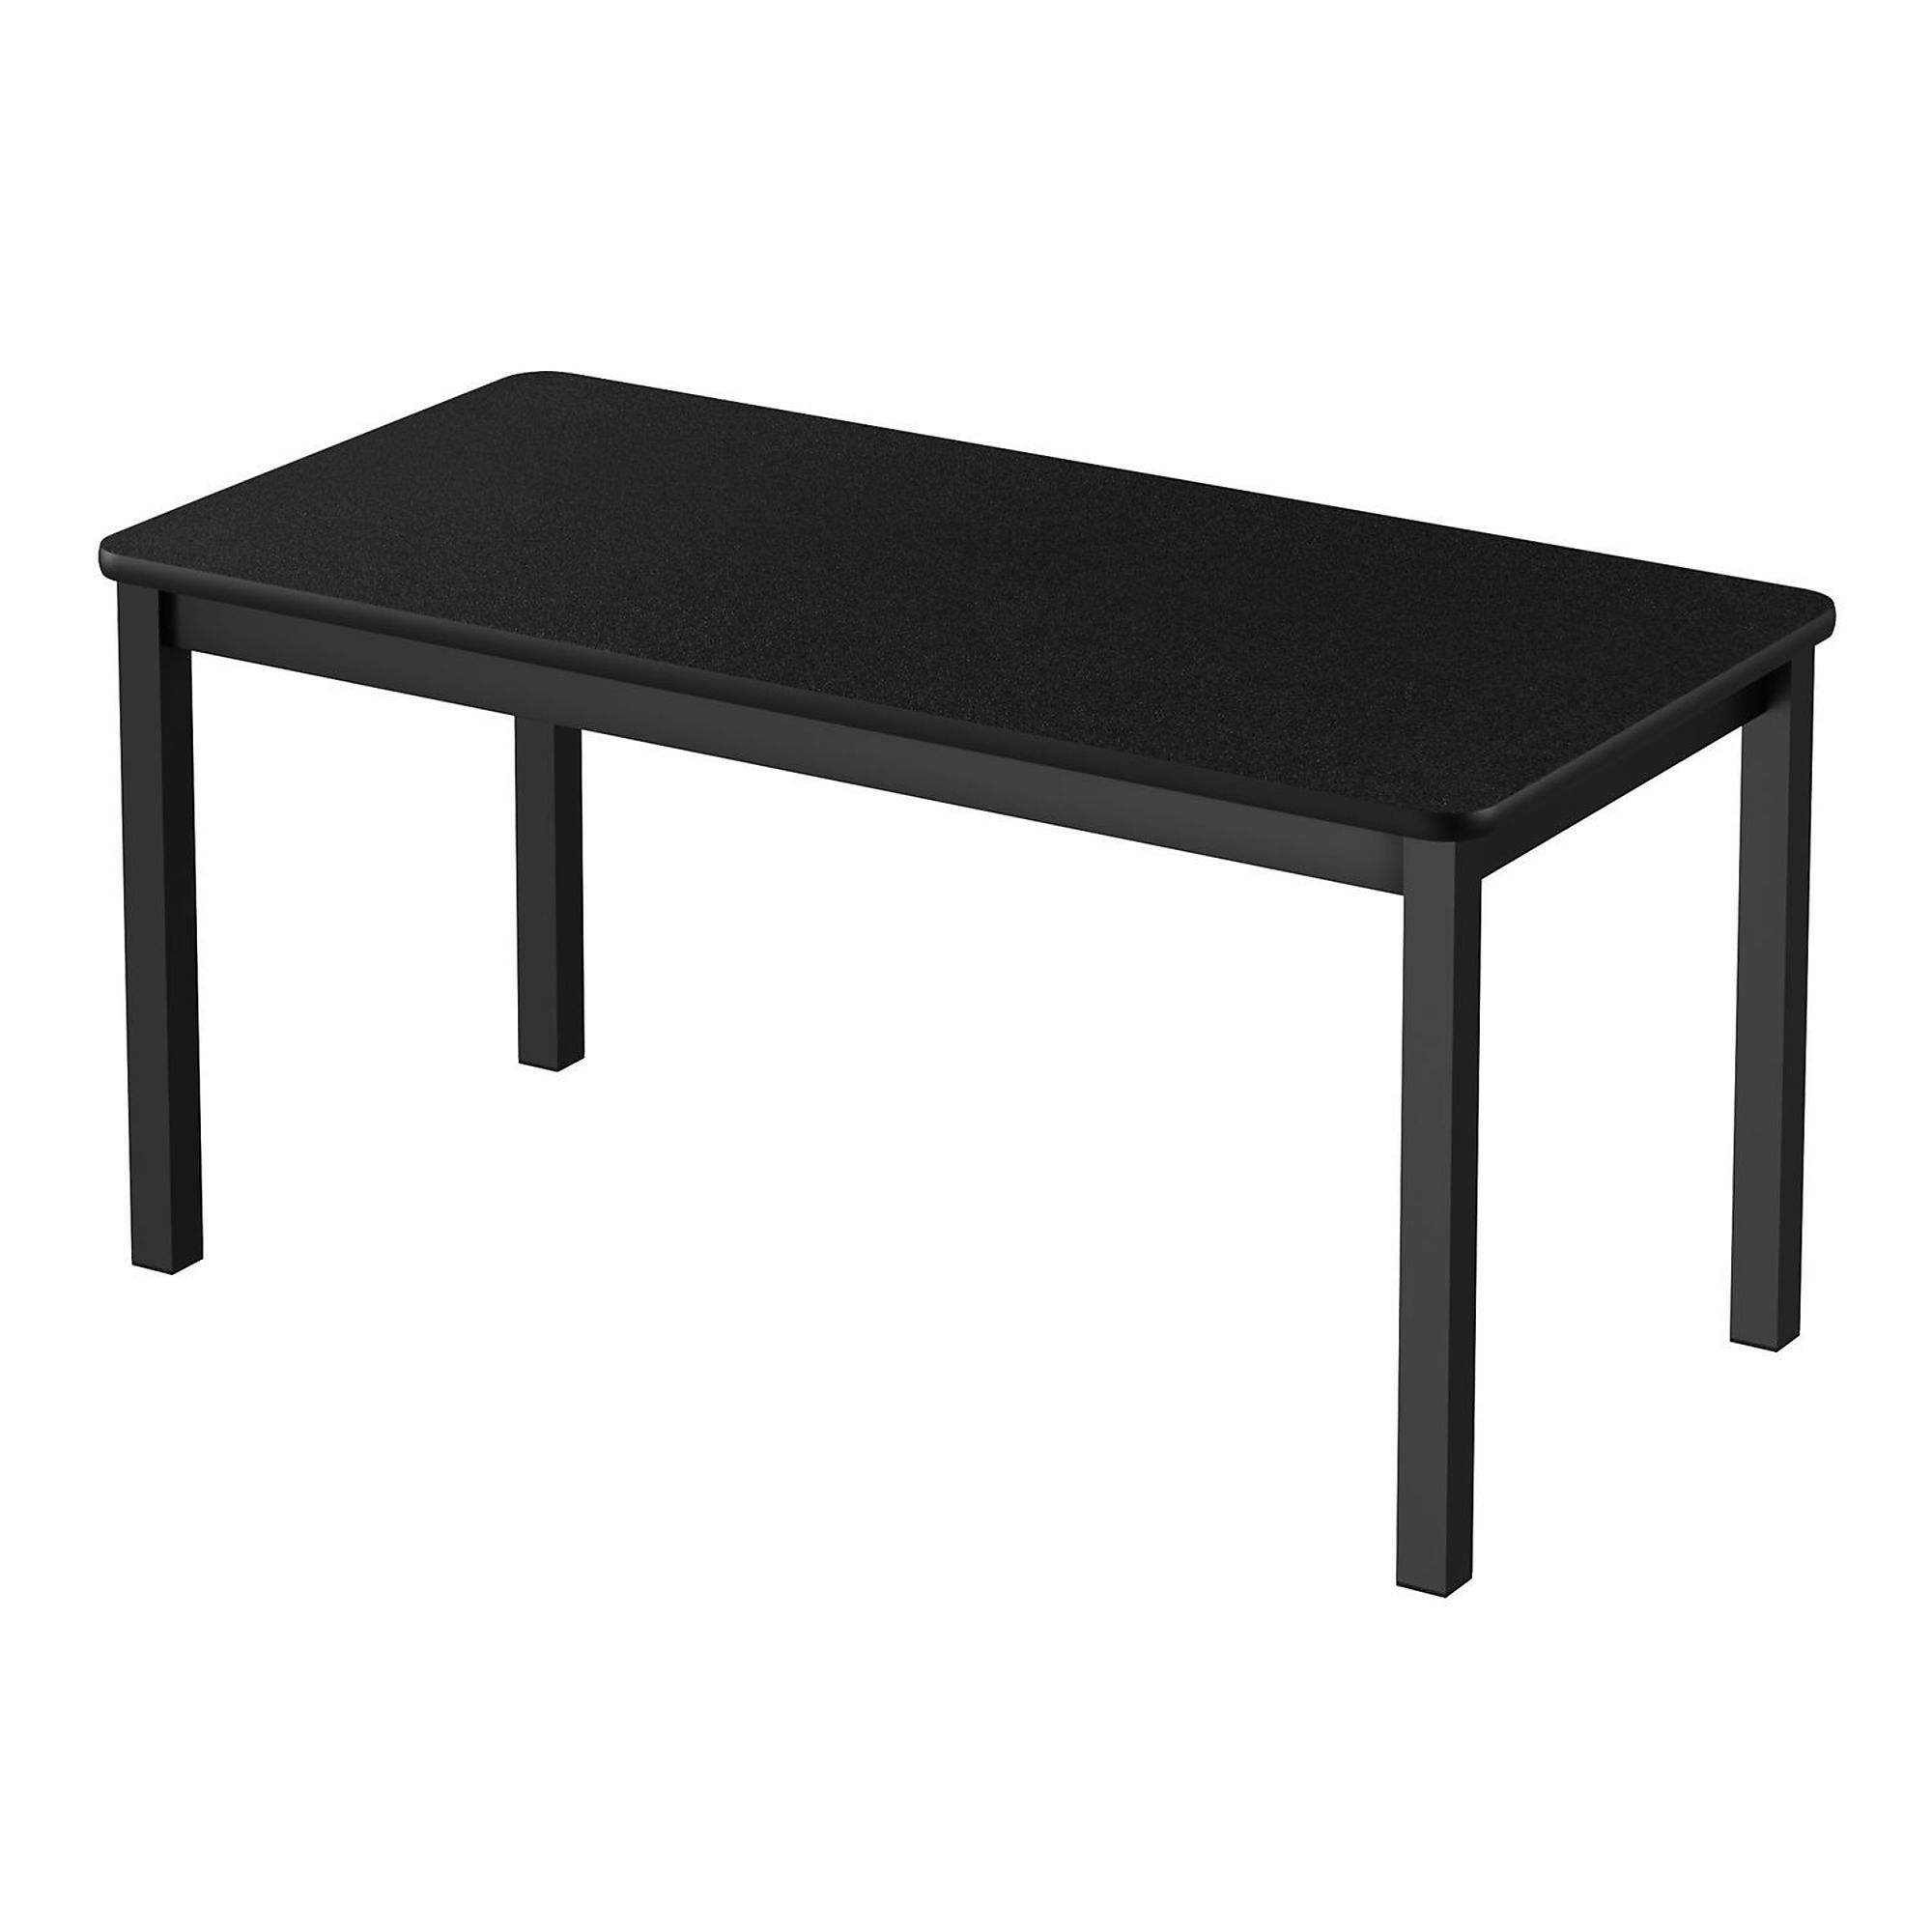 Correll, TFL Library Table, Black Granite, 36x60, Height 29 in, Width 30 in, Length 60 in, Model LR3060TF-07